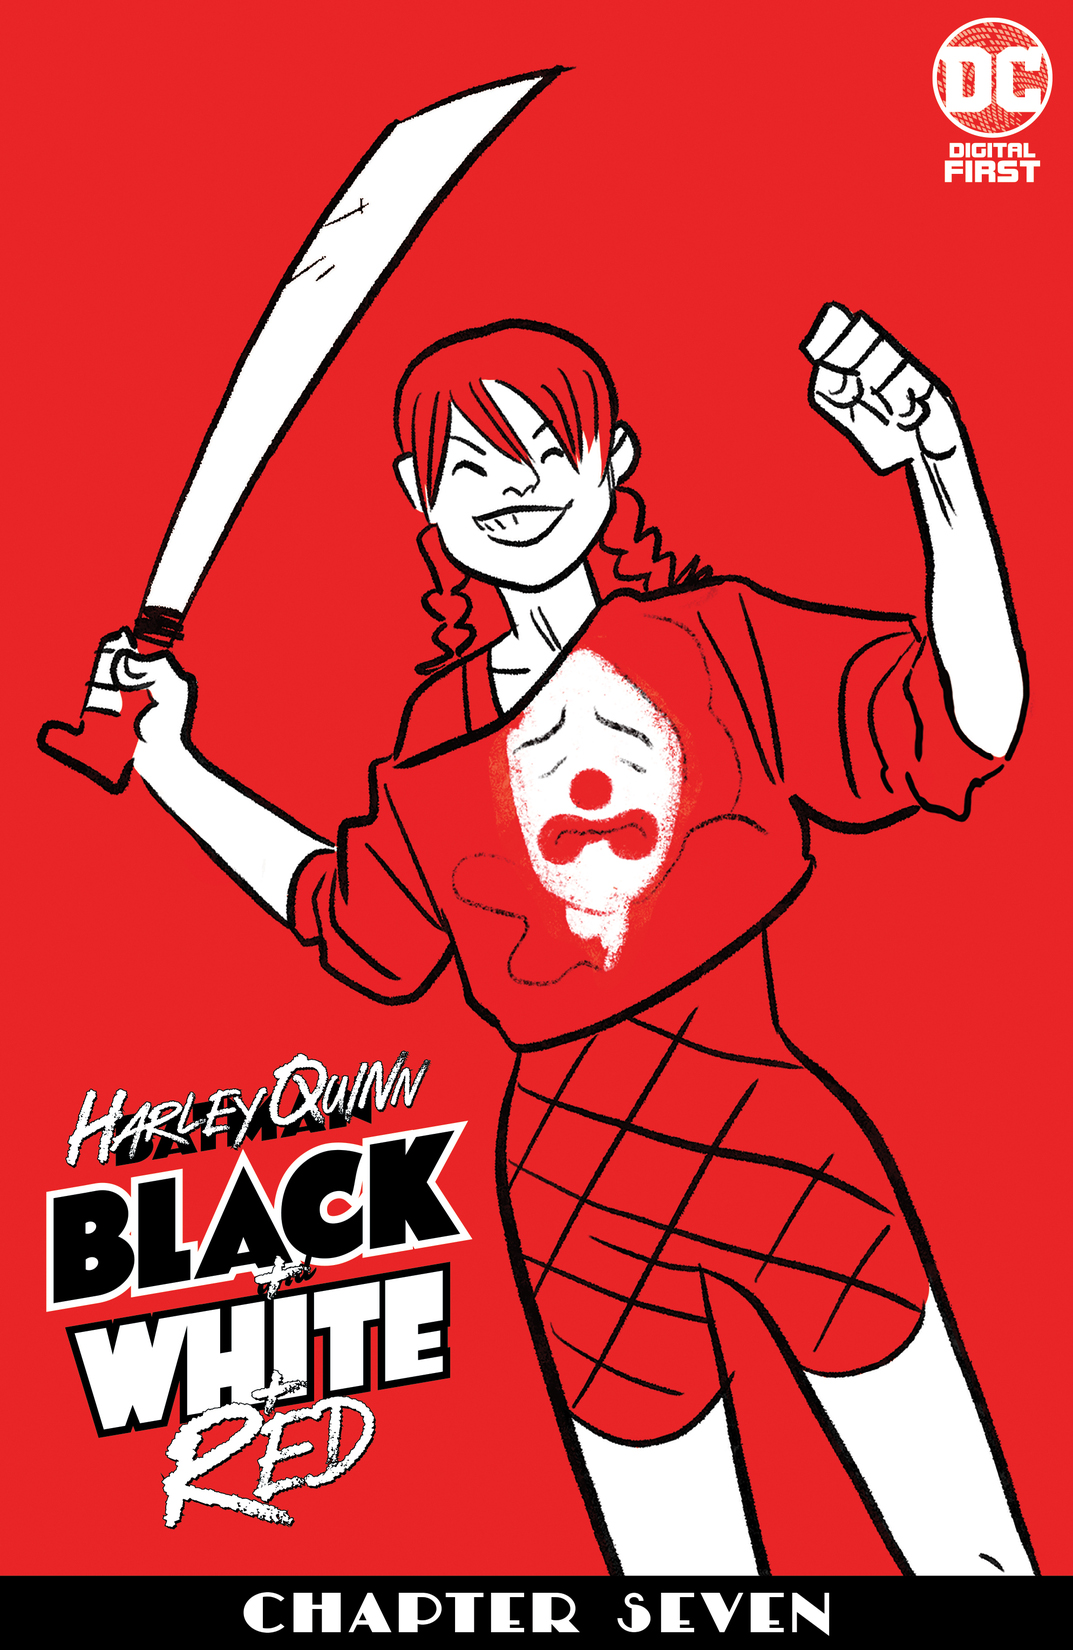 Harley Quinn Black + White + Red #7 preview images